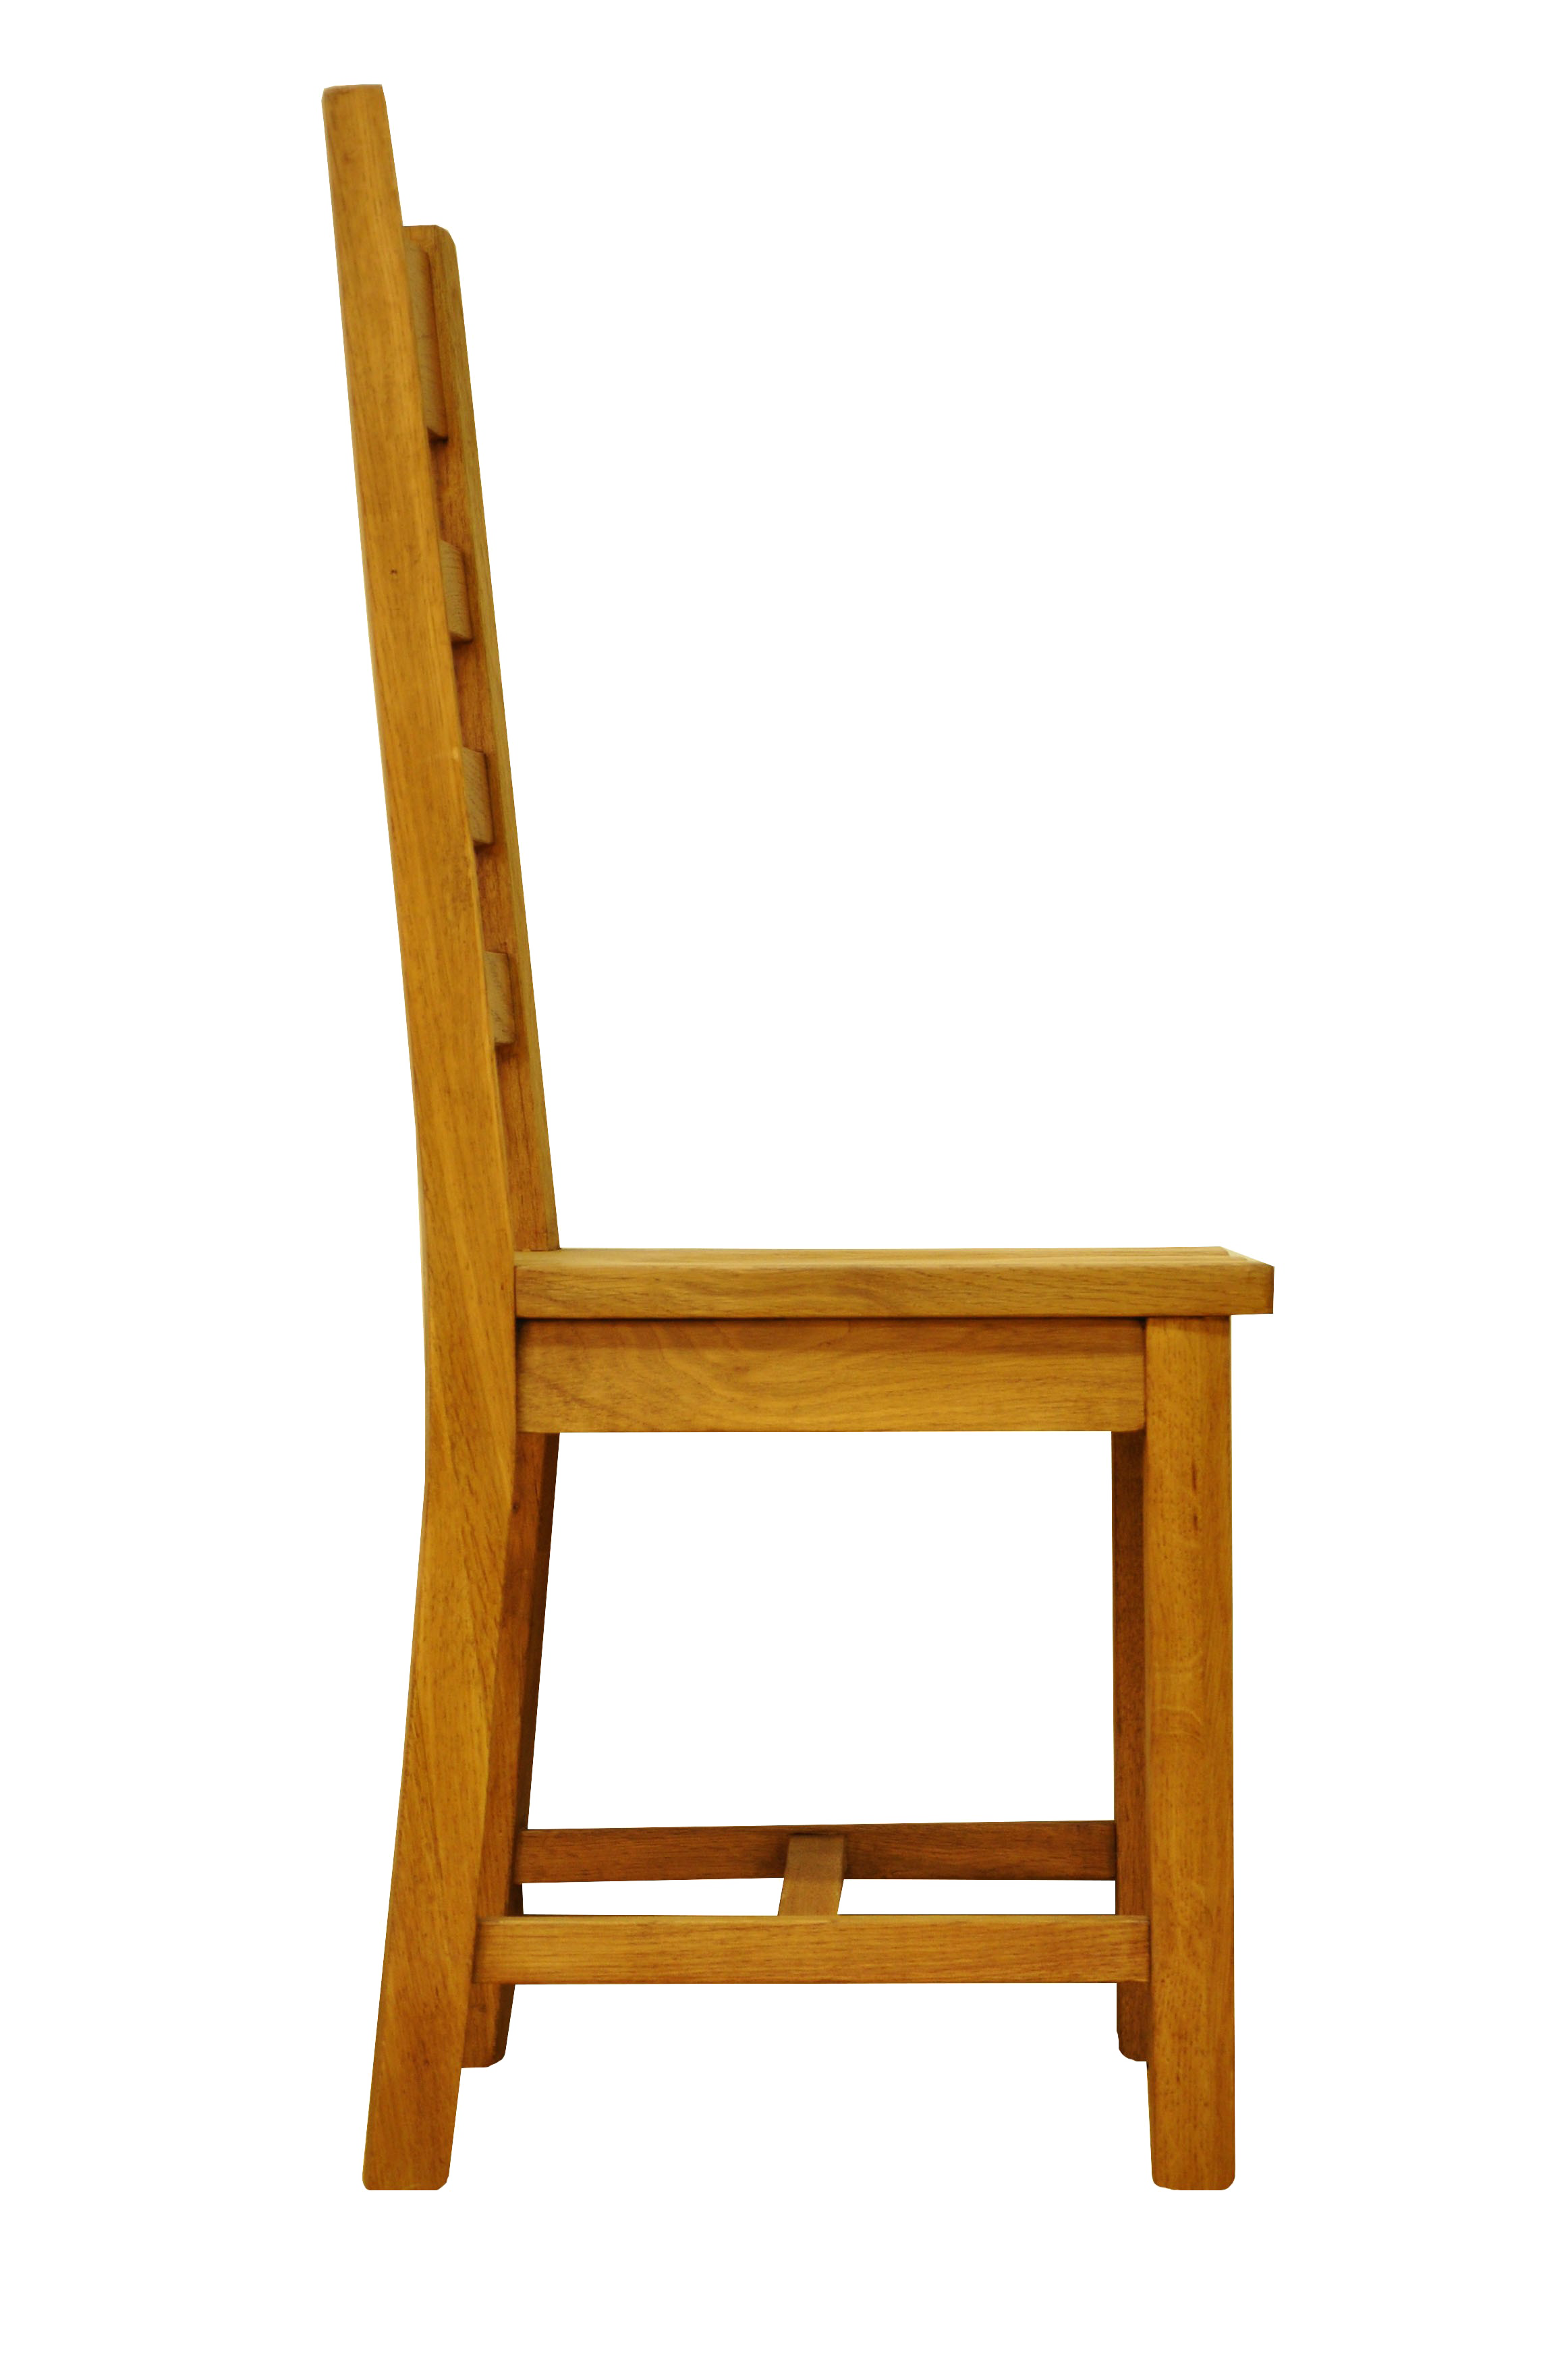 Ladder-Back Chair Picture PNG Download Free PNG Image